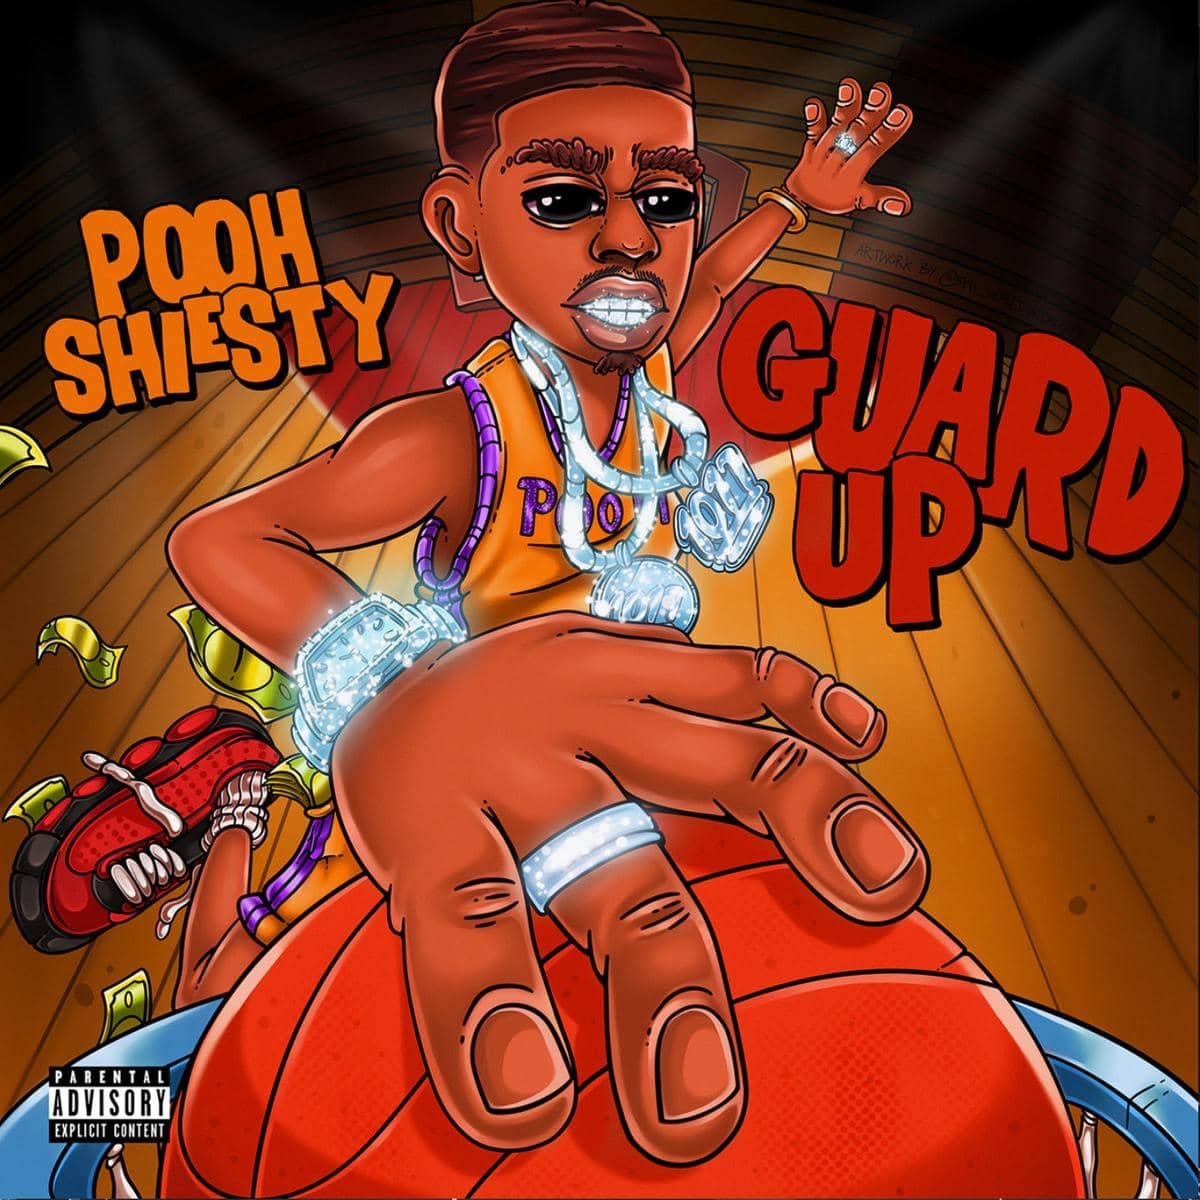 Pooh Shiesty Returns With New Banger Guard Up. The Beat 105.5 Rochester